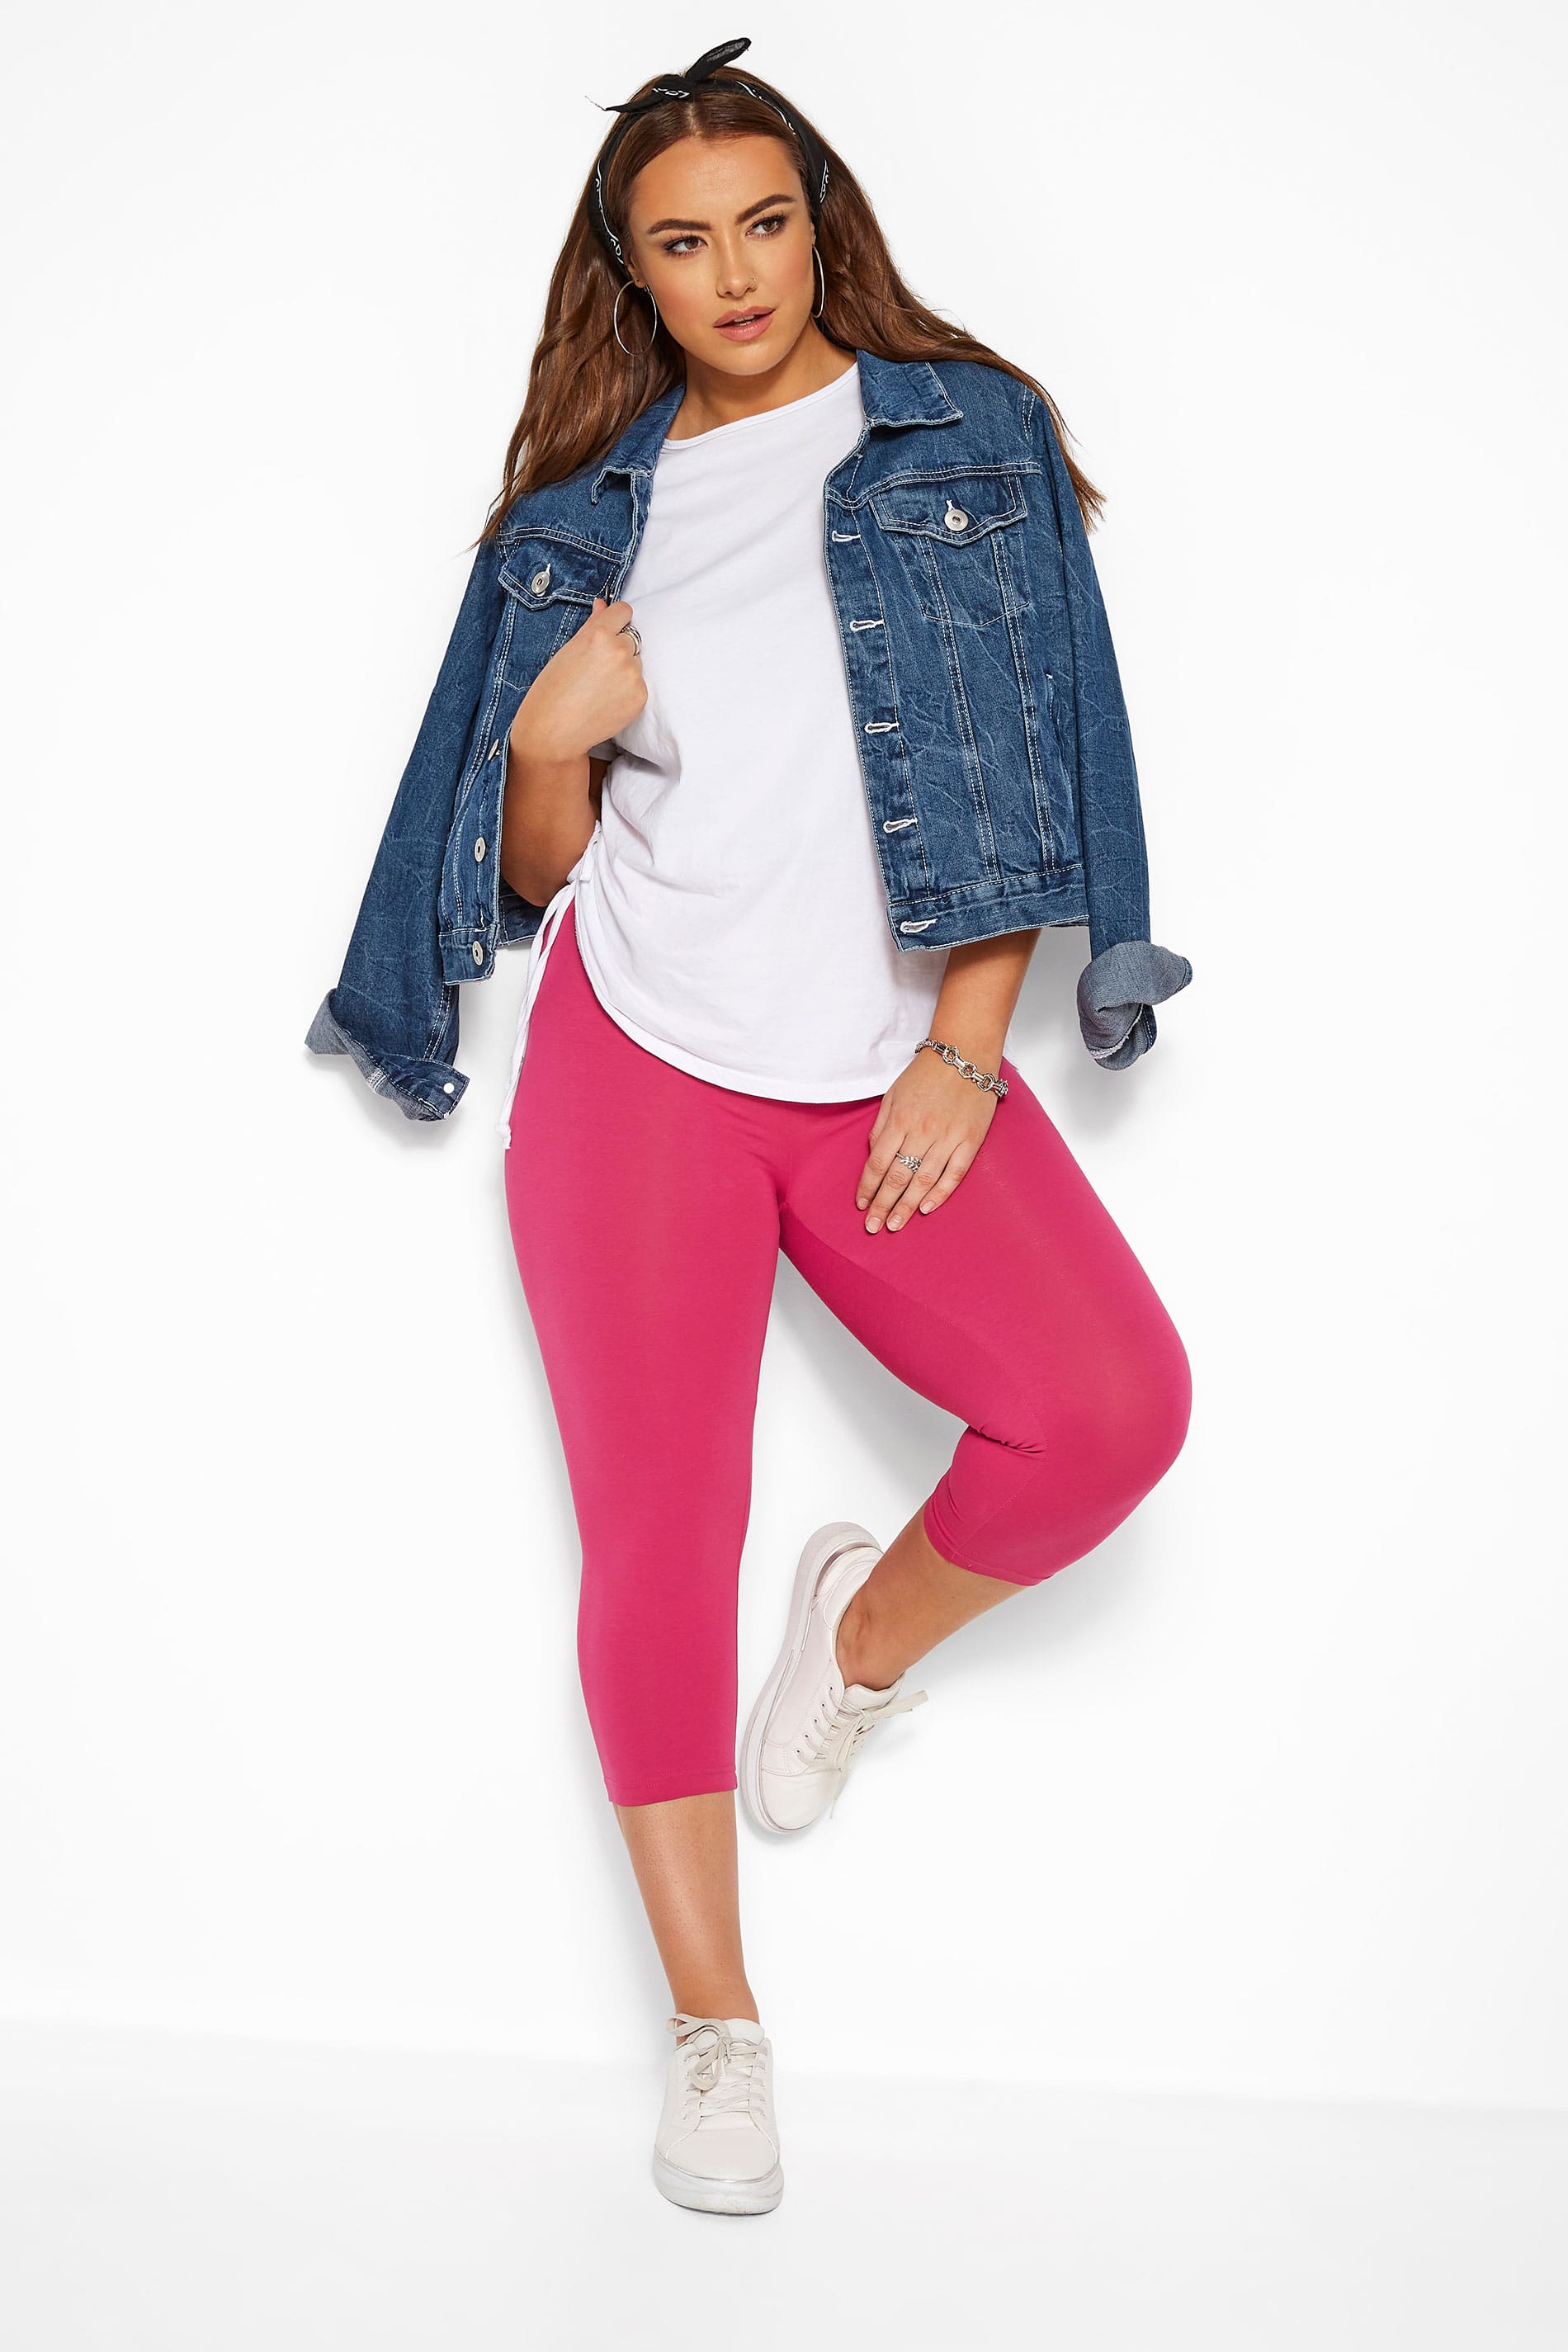 What To Wear With Bright Pink Leggings